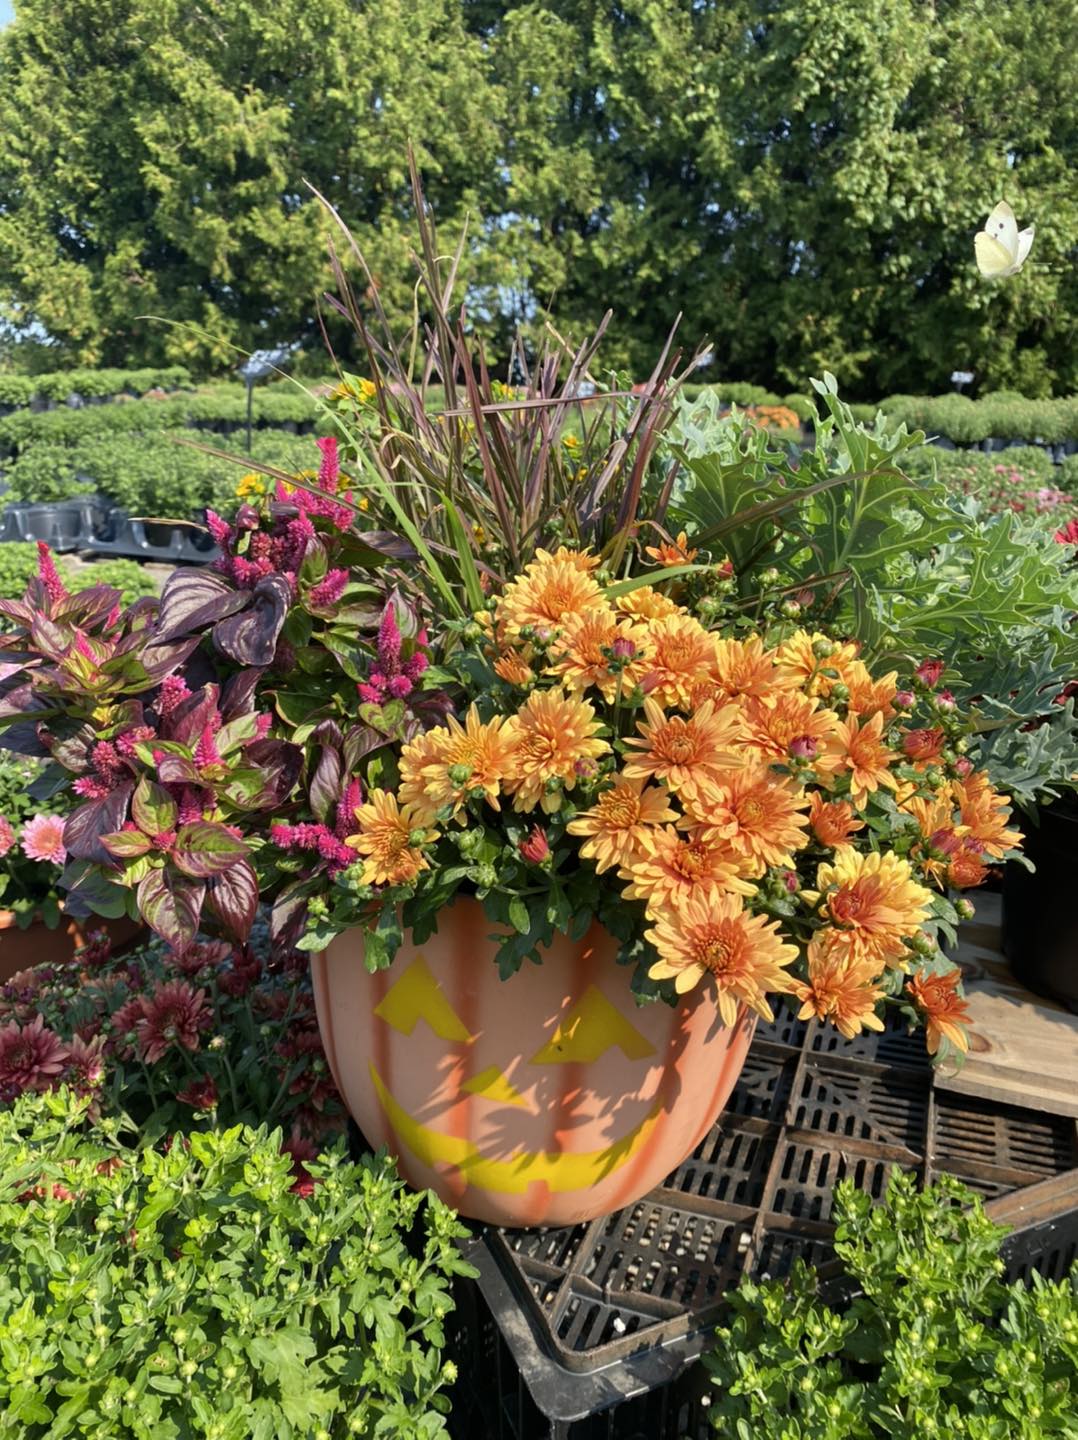 Mums are in stock!